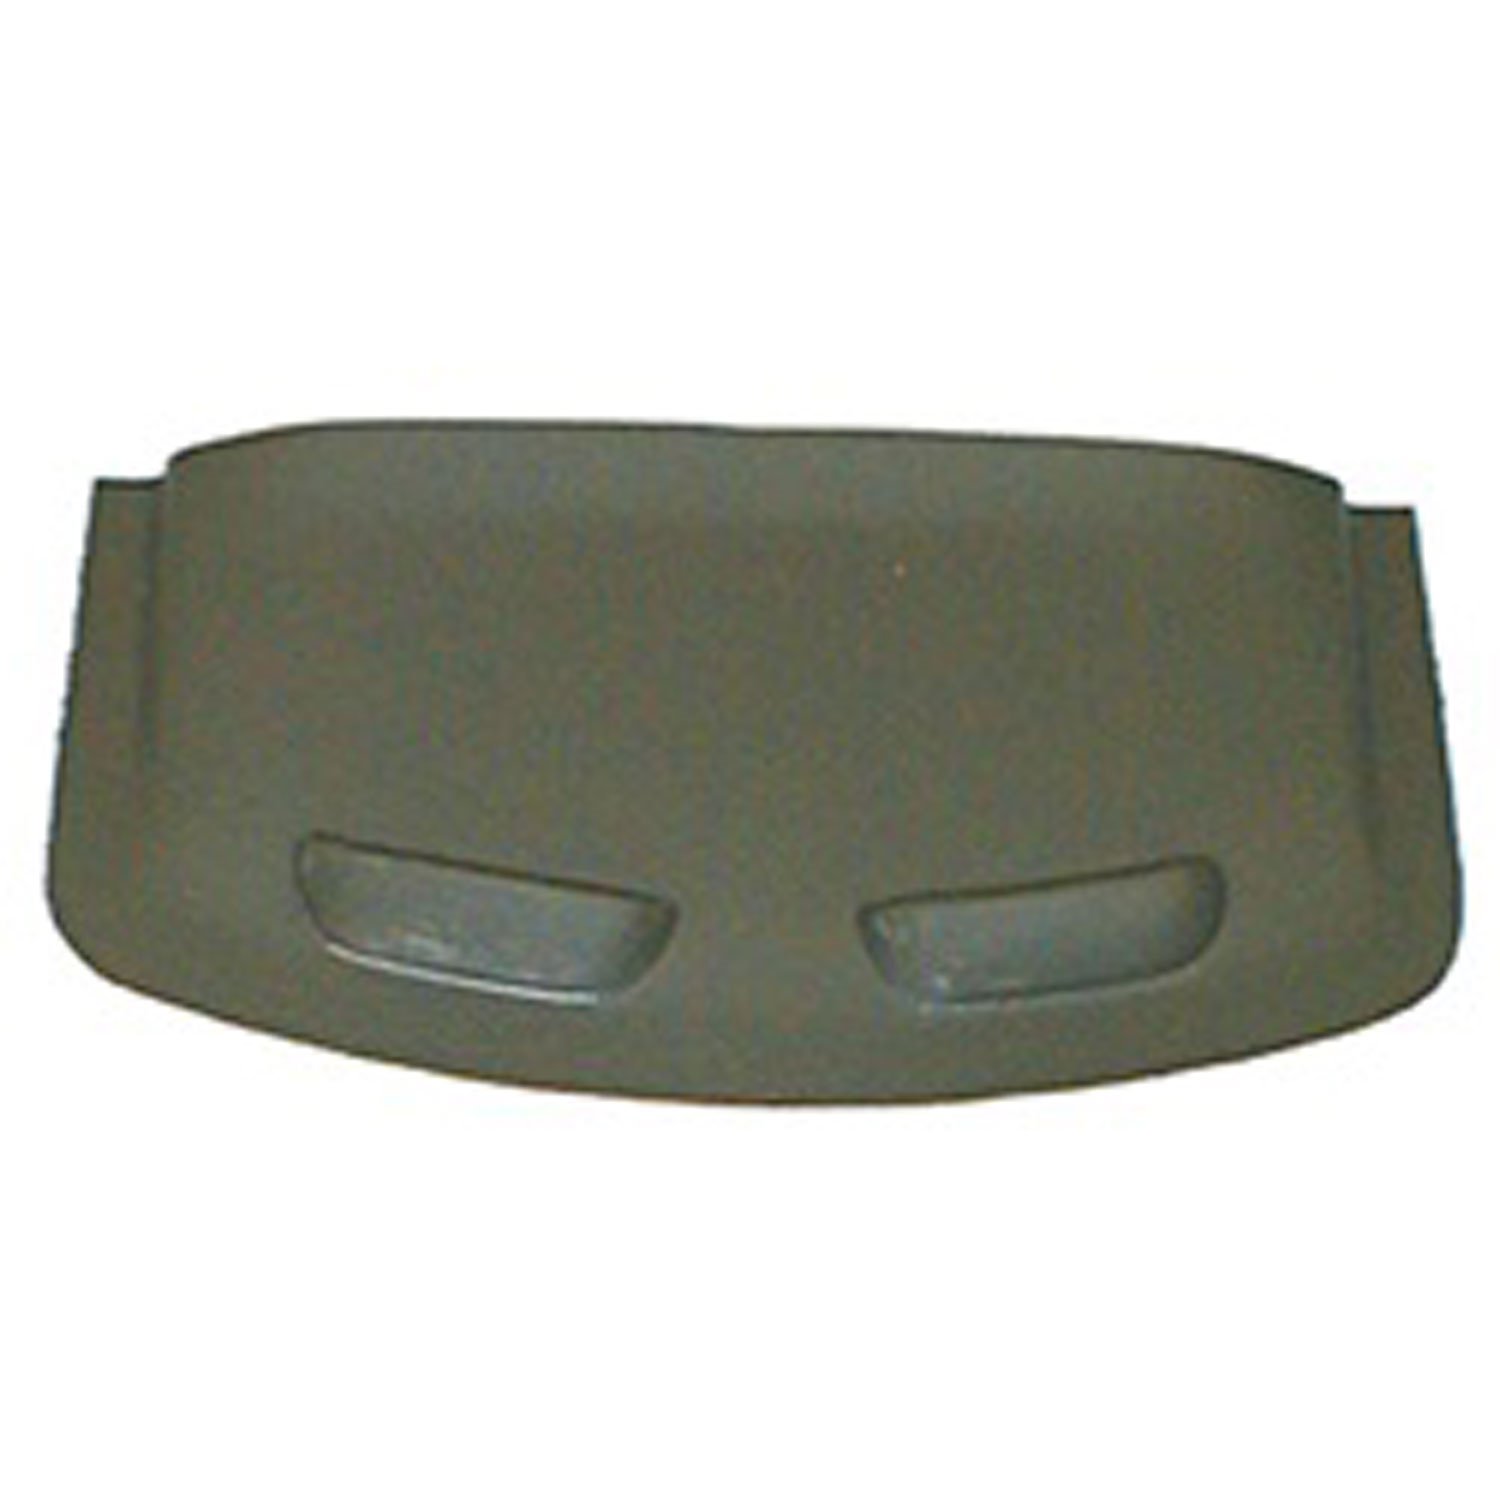 Replacement axe sheath from Omix-ADA, Fits 41-1945 Willys MB and Ford GPW.